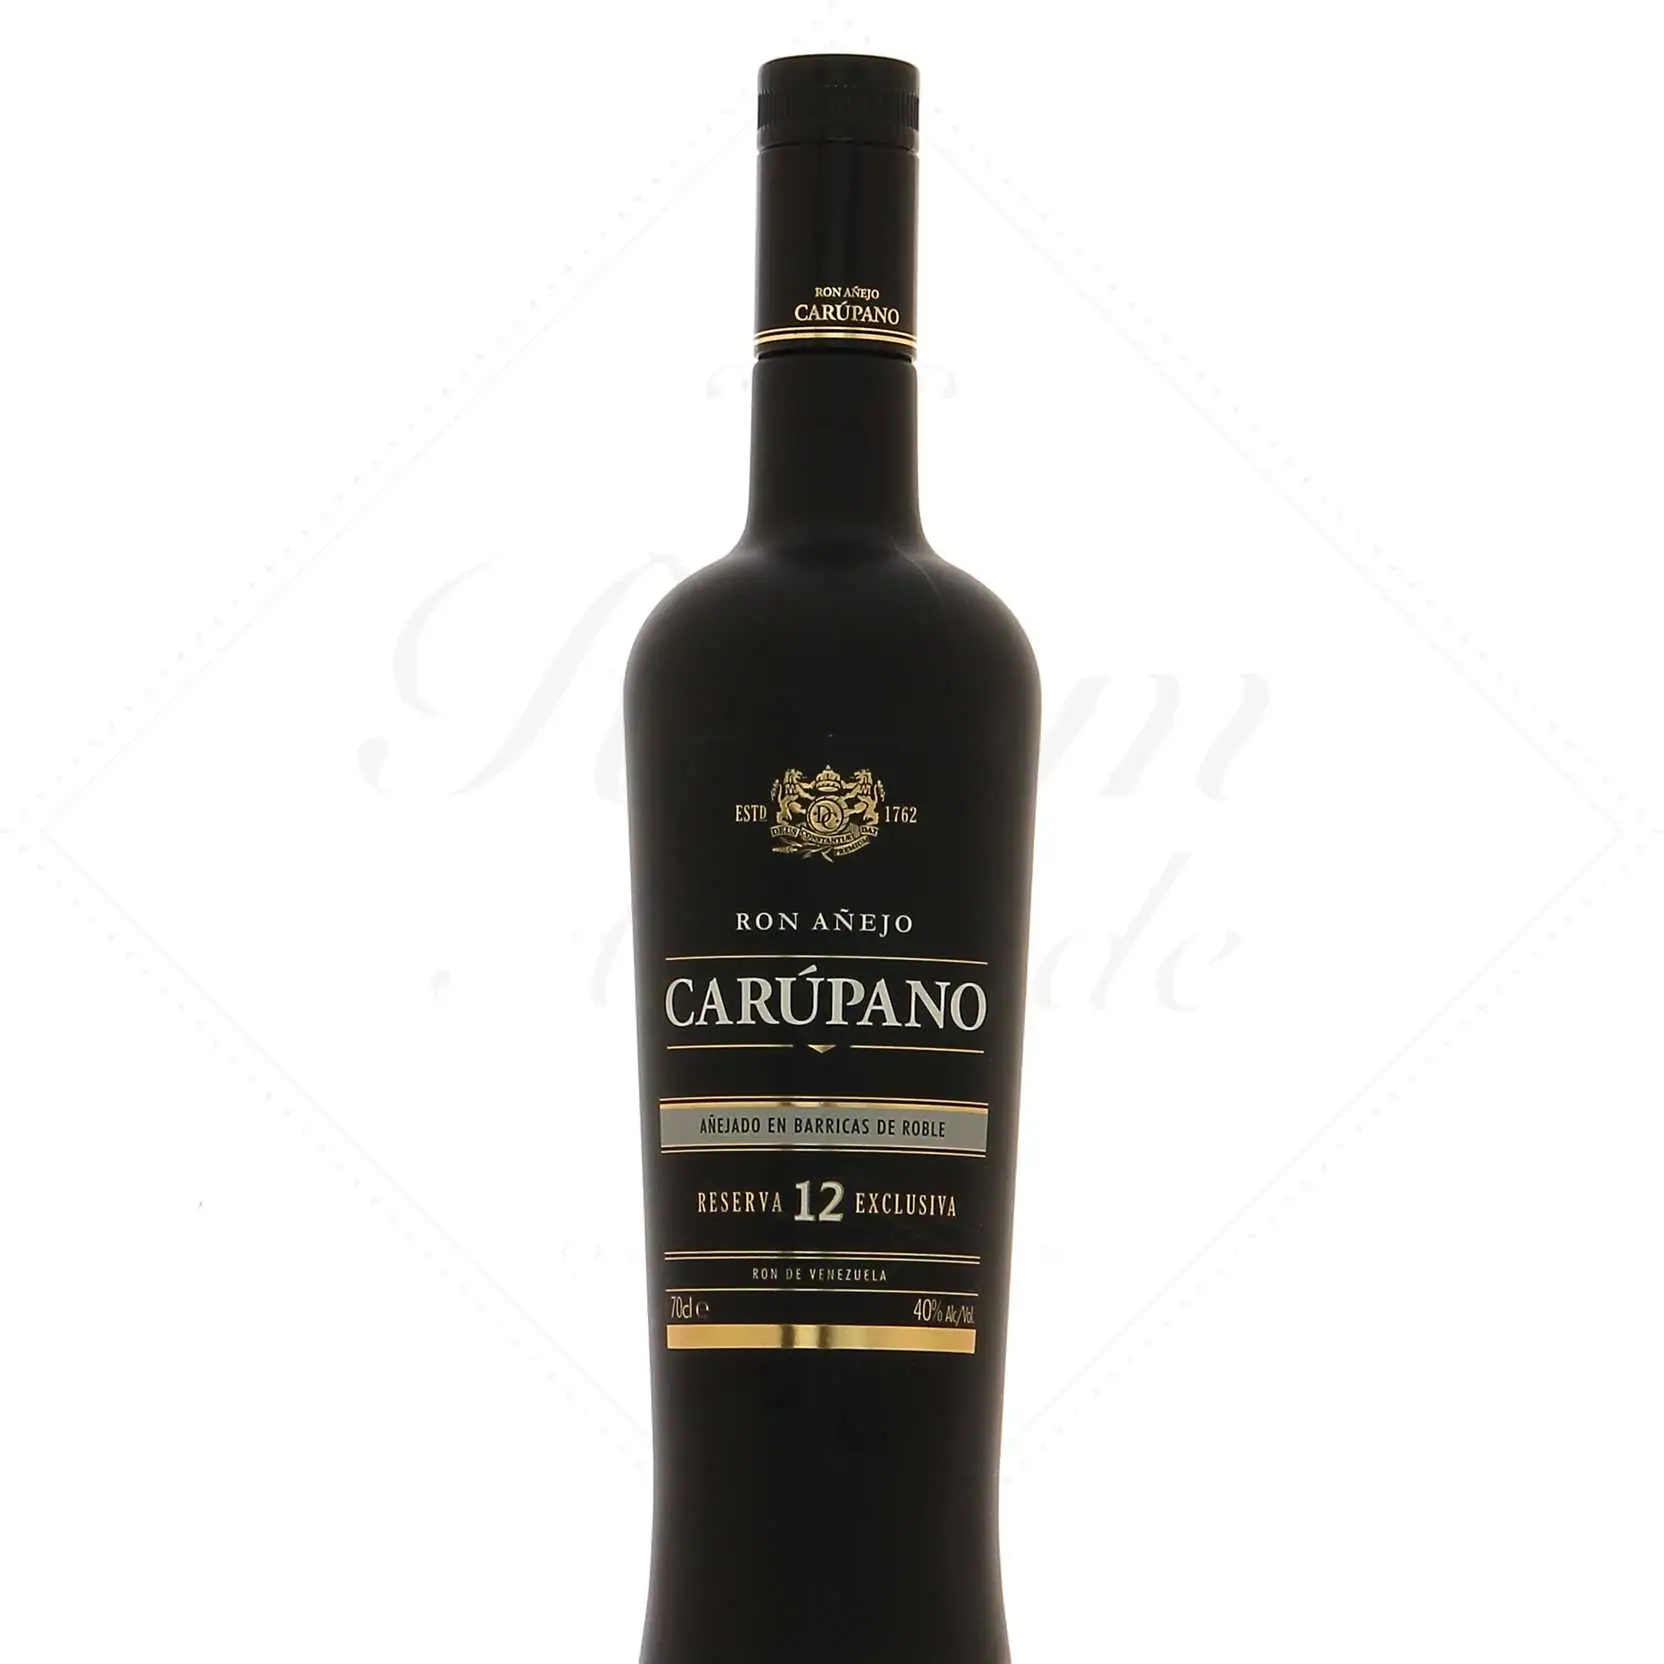 Image of the front of the bottle of the rum Carúpano Reserva 12 Exclusiva